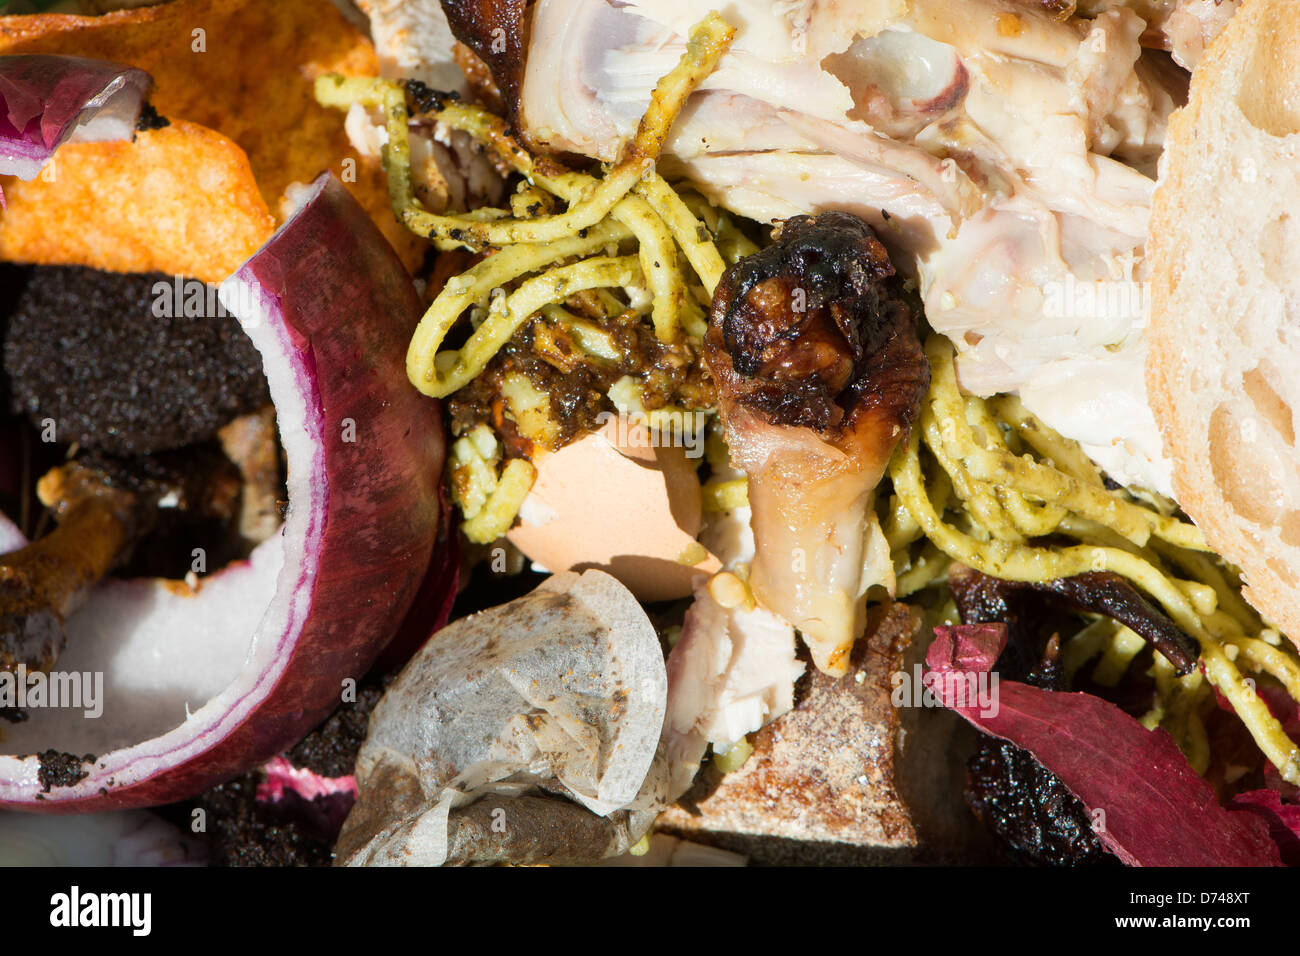 Food waste in a food recycling bin. UK, 2013.. Stock Photo